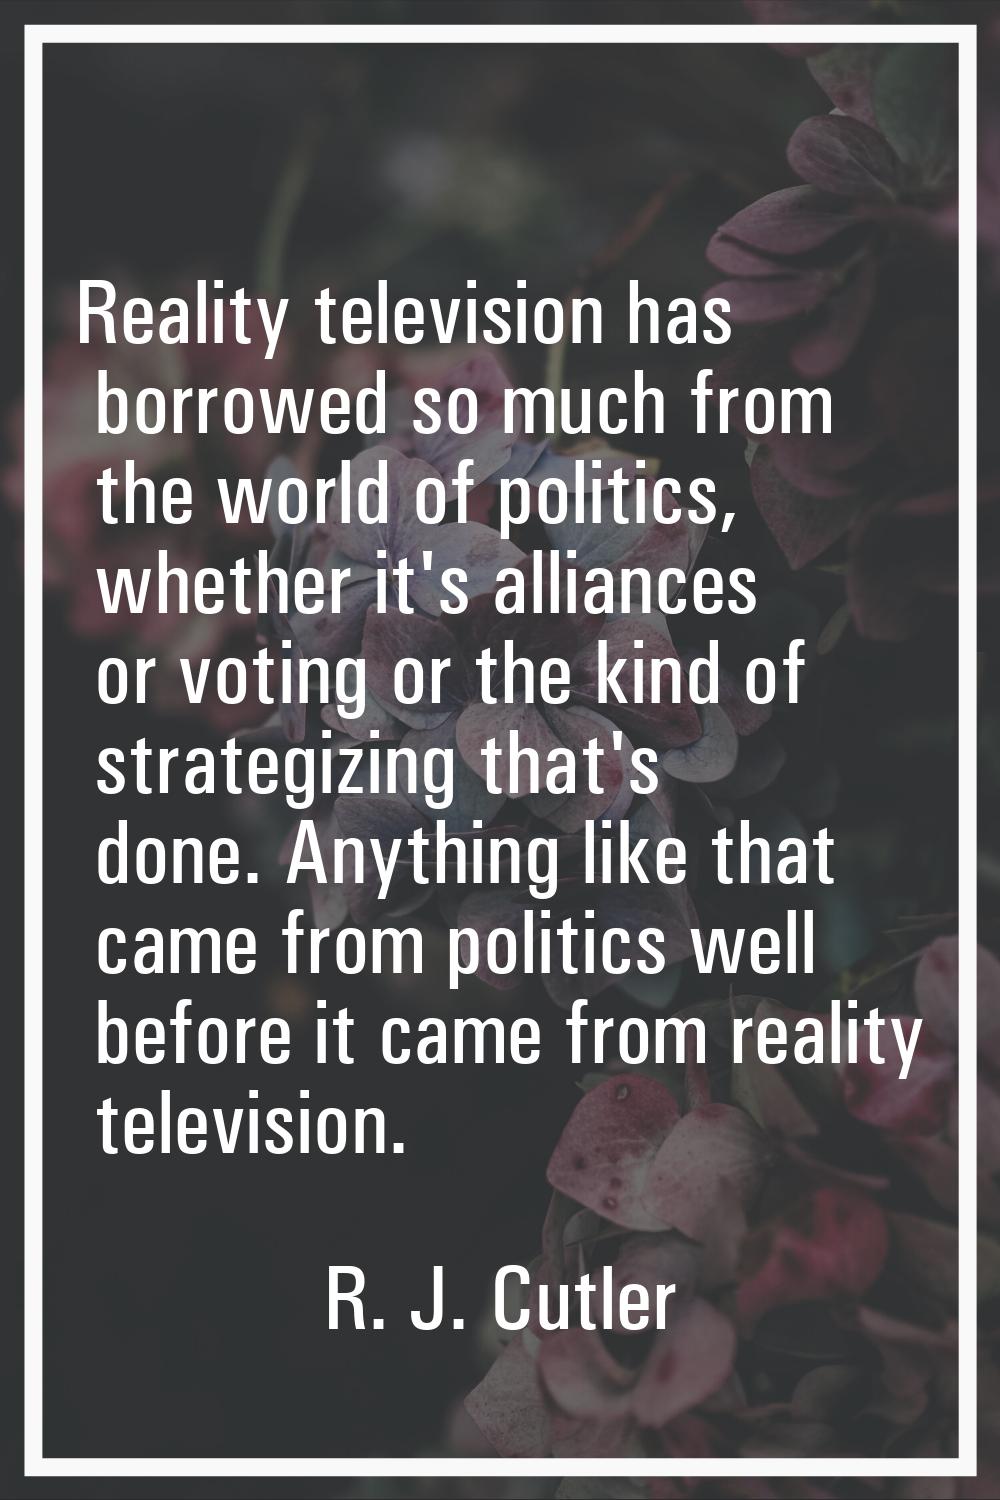 Reality television has borrowed so much from the world of politics, whether it's alliances or votin